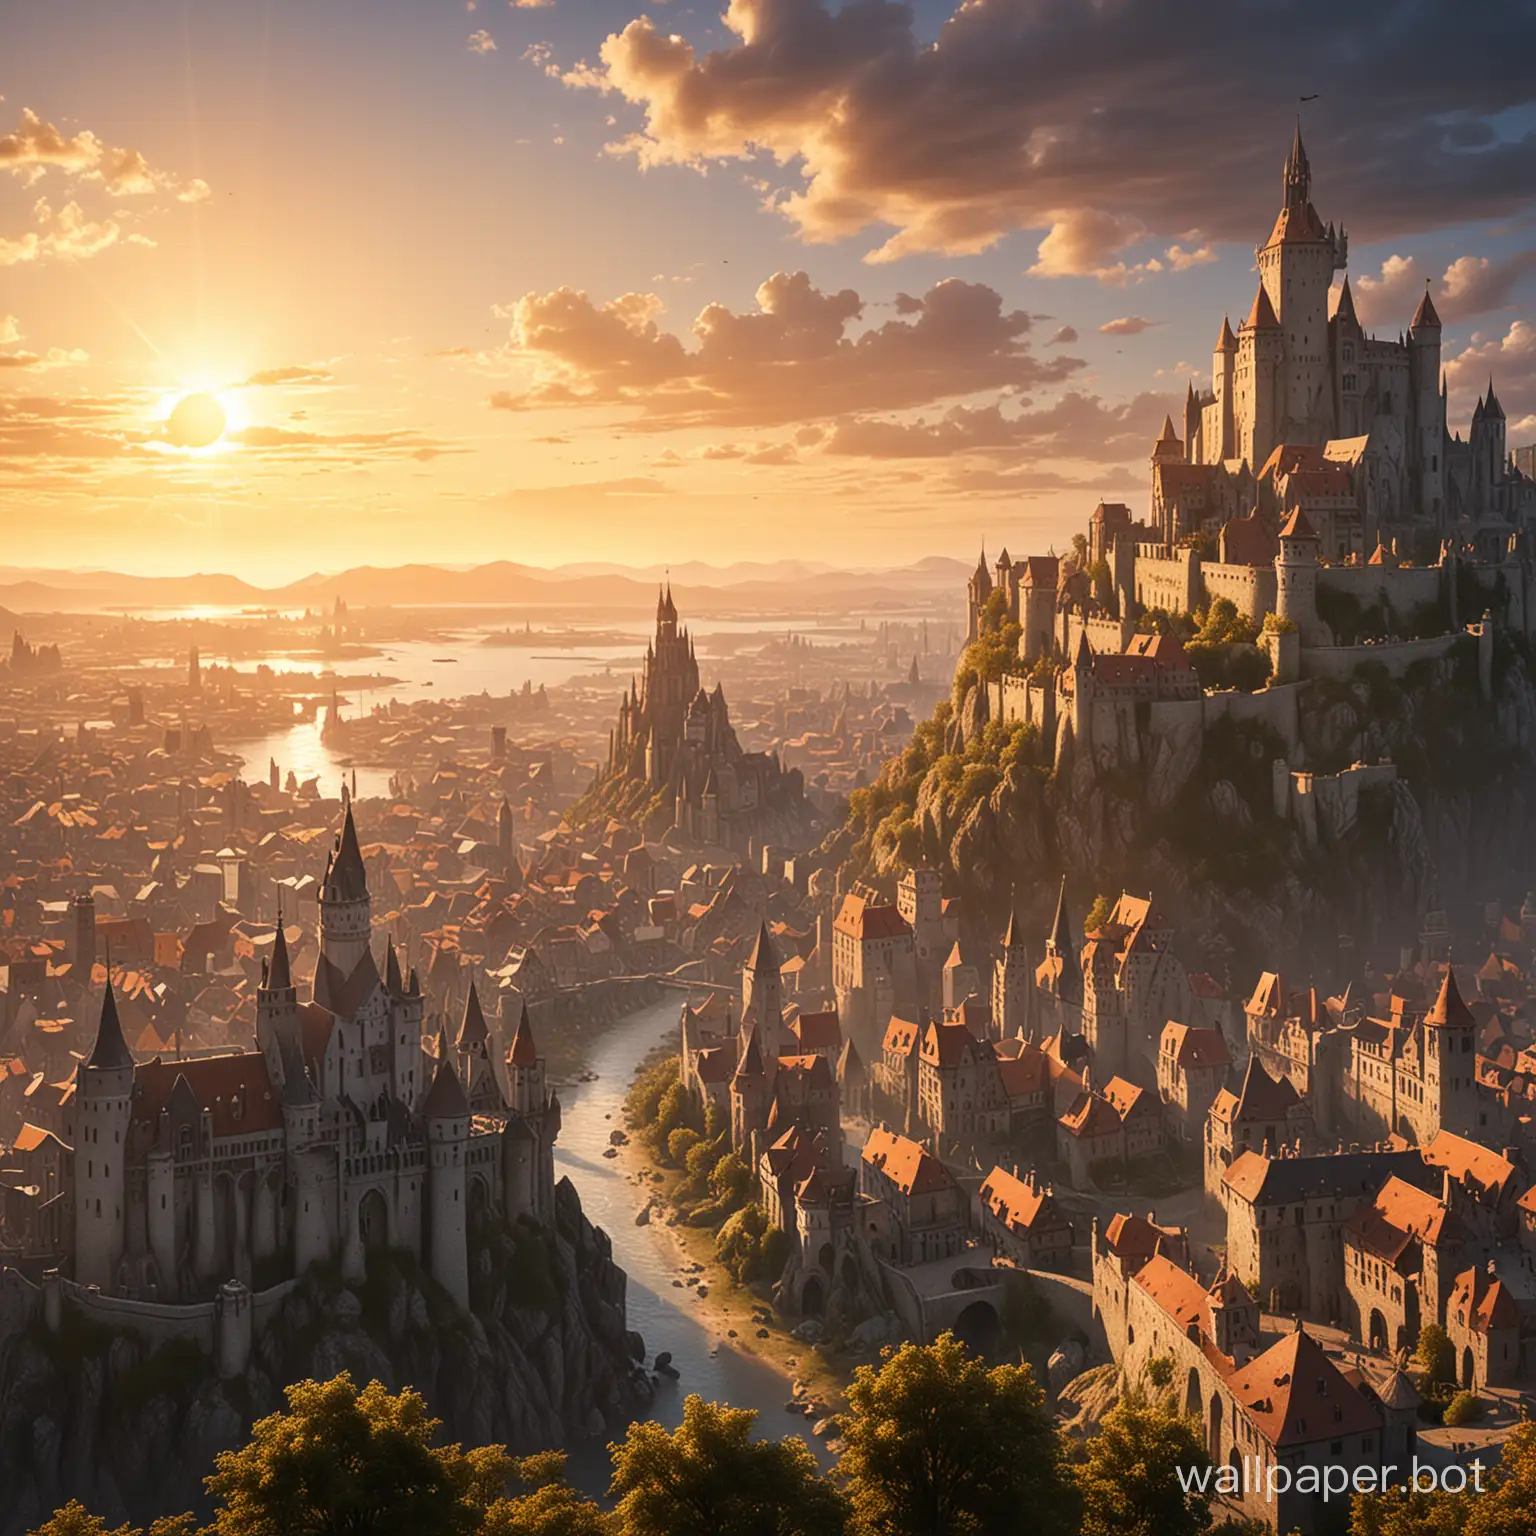 high fantasy city with a european middle ages castle in the background and sun going down